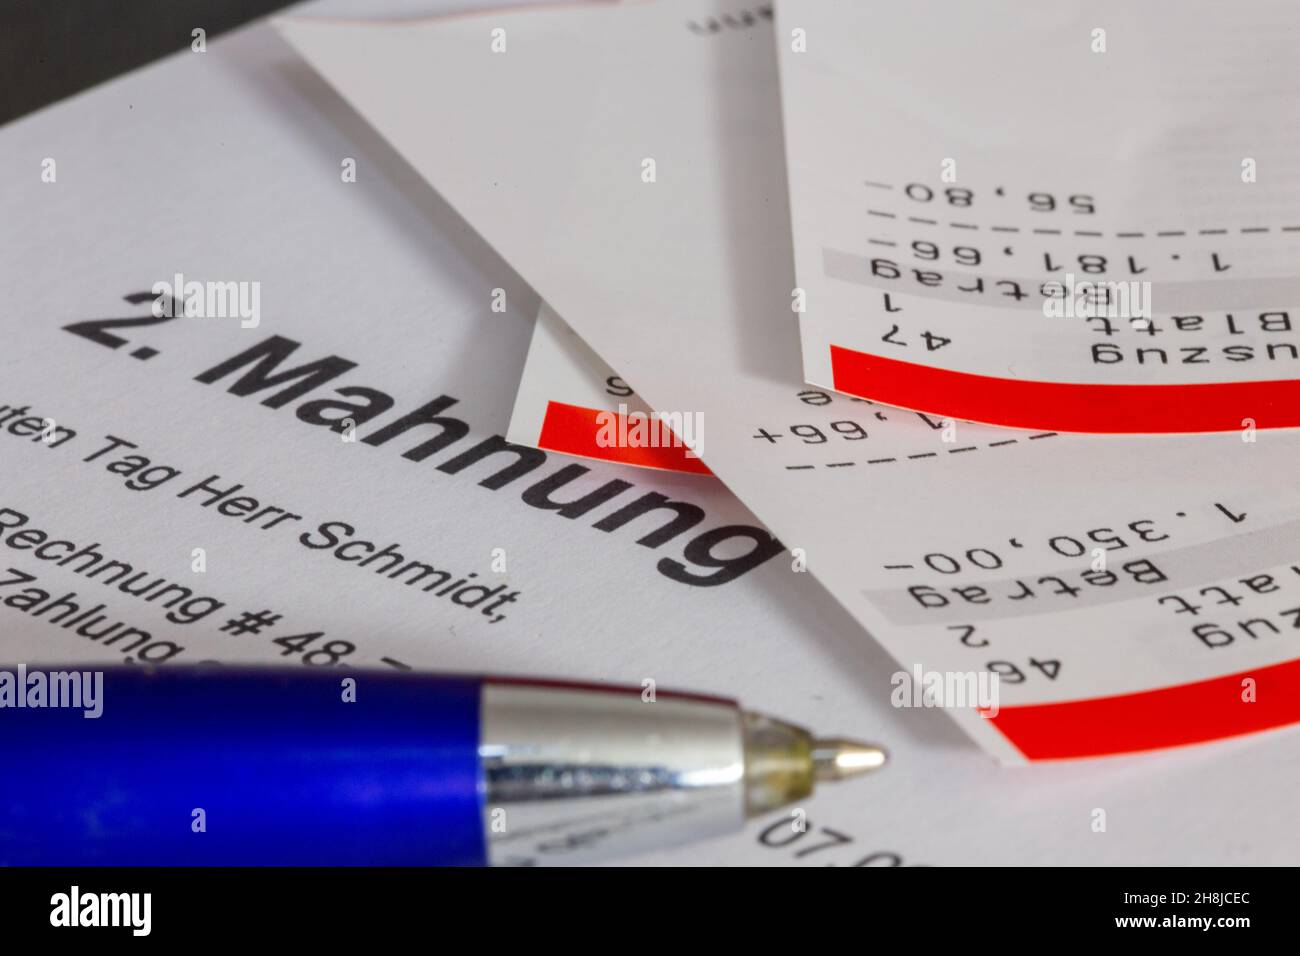 Symbolic image of debt, over-indebtedness: Close-up of bank statements and a dunning notice Stock Photo